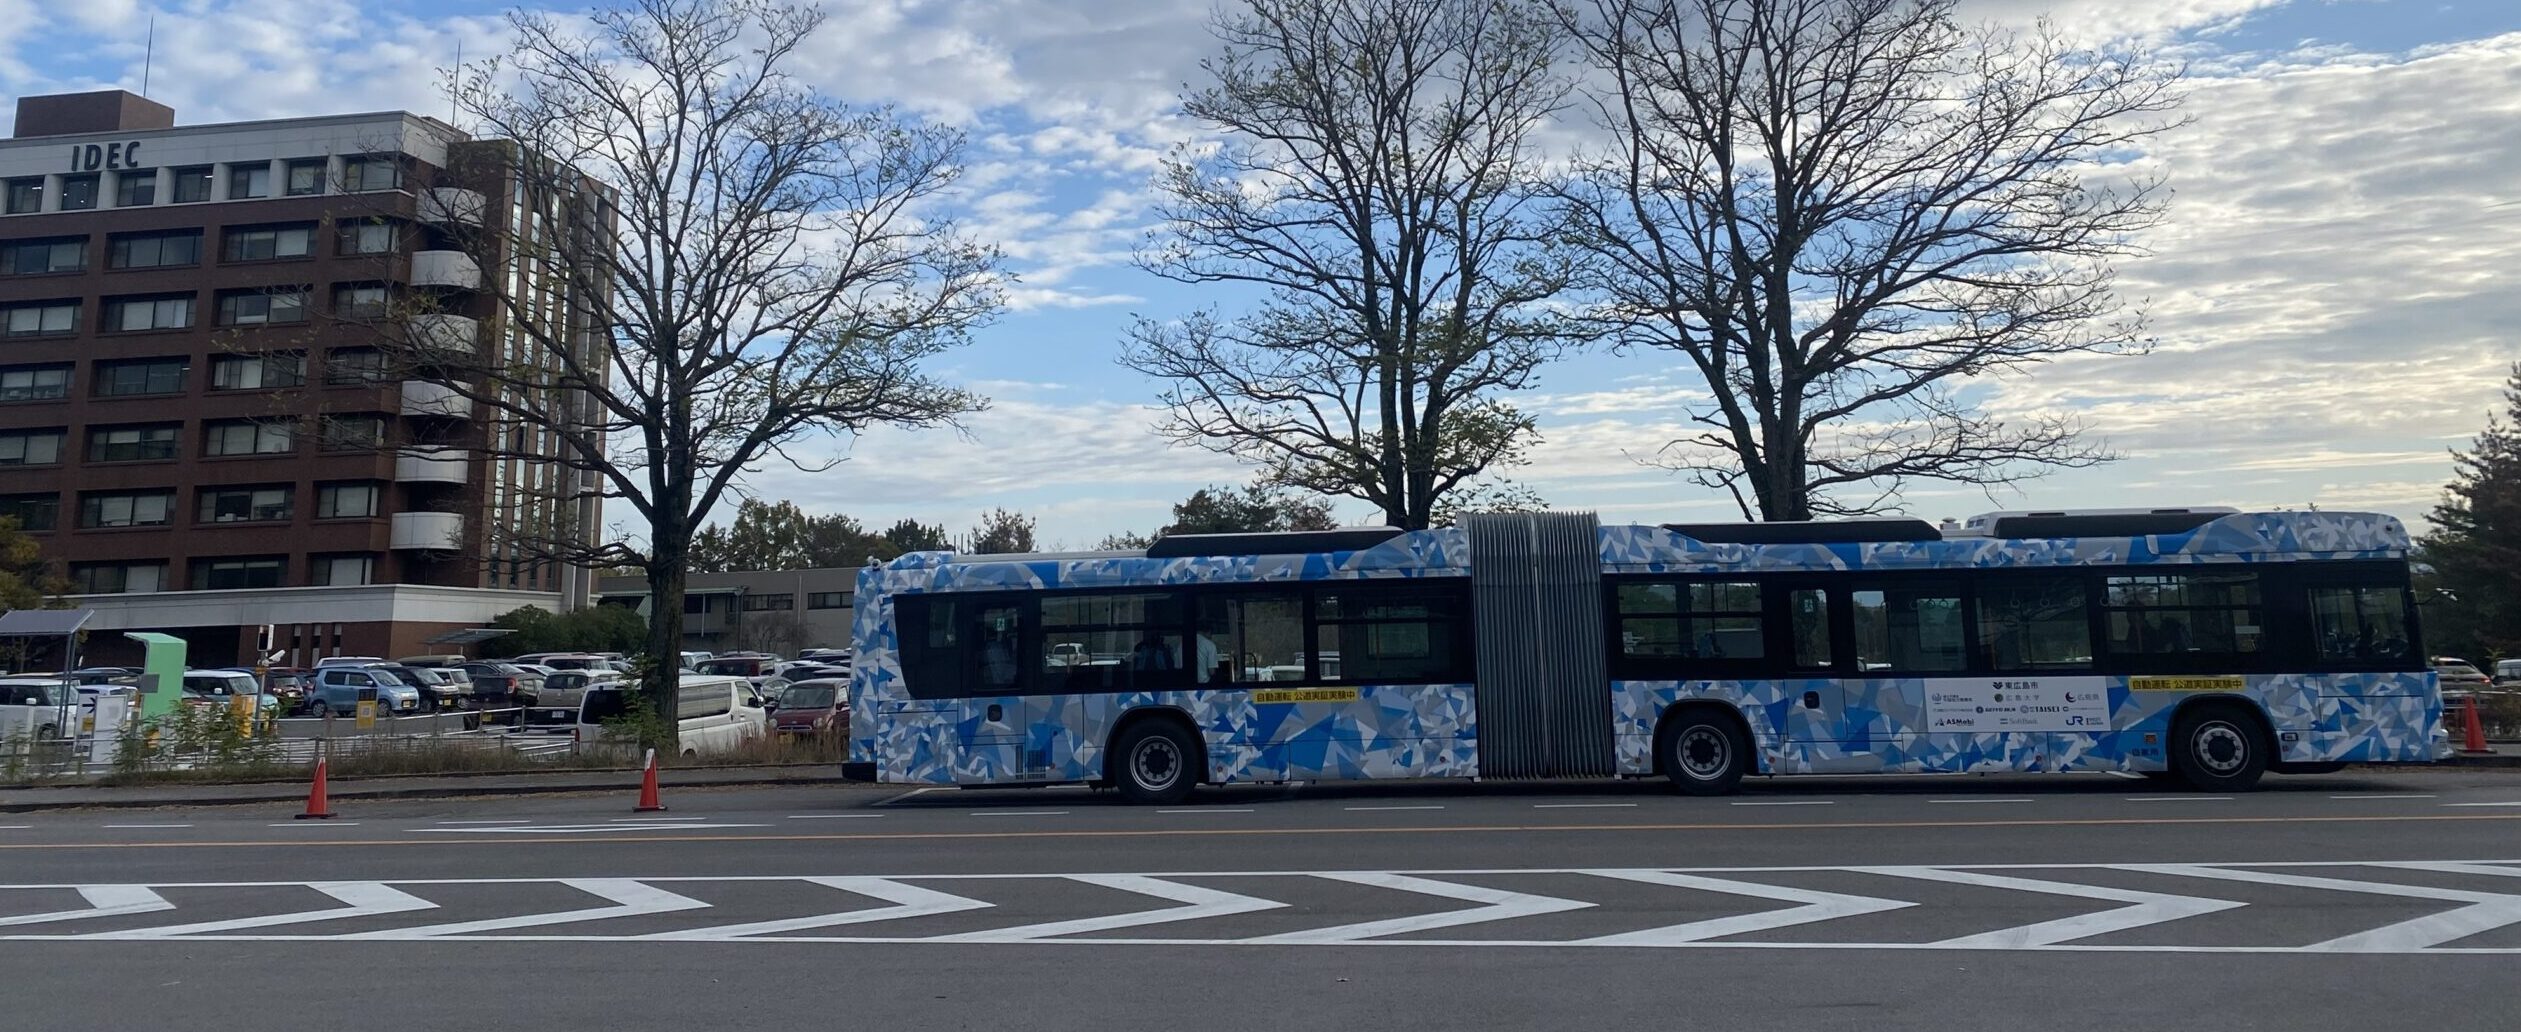 Self-driving bus demonstration experiment: Articulated bus running on public roads begins in Higashihiroshima City for the first time in Japan